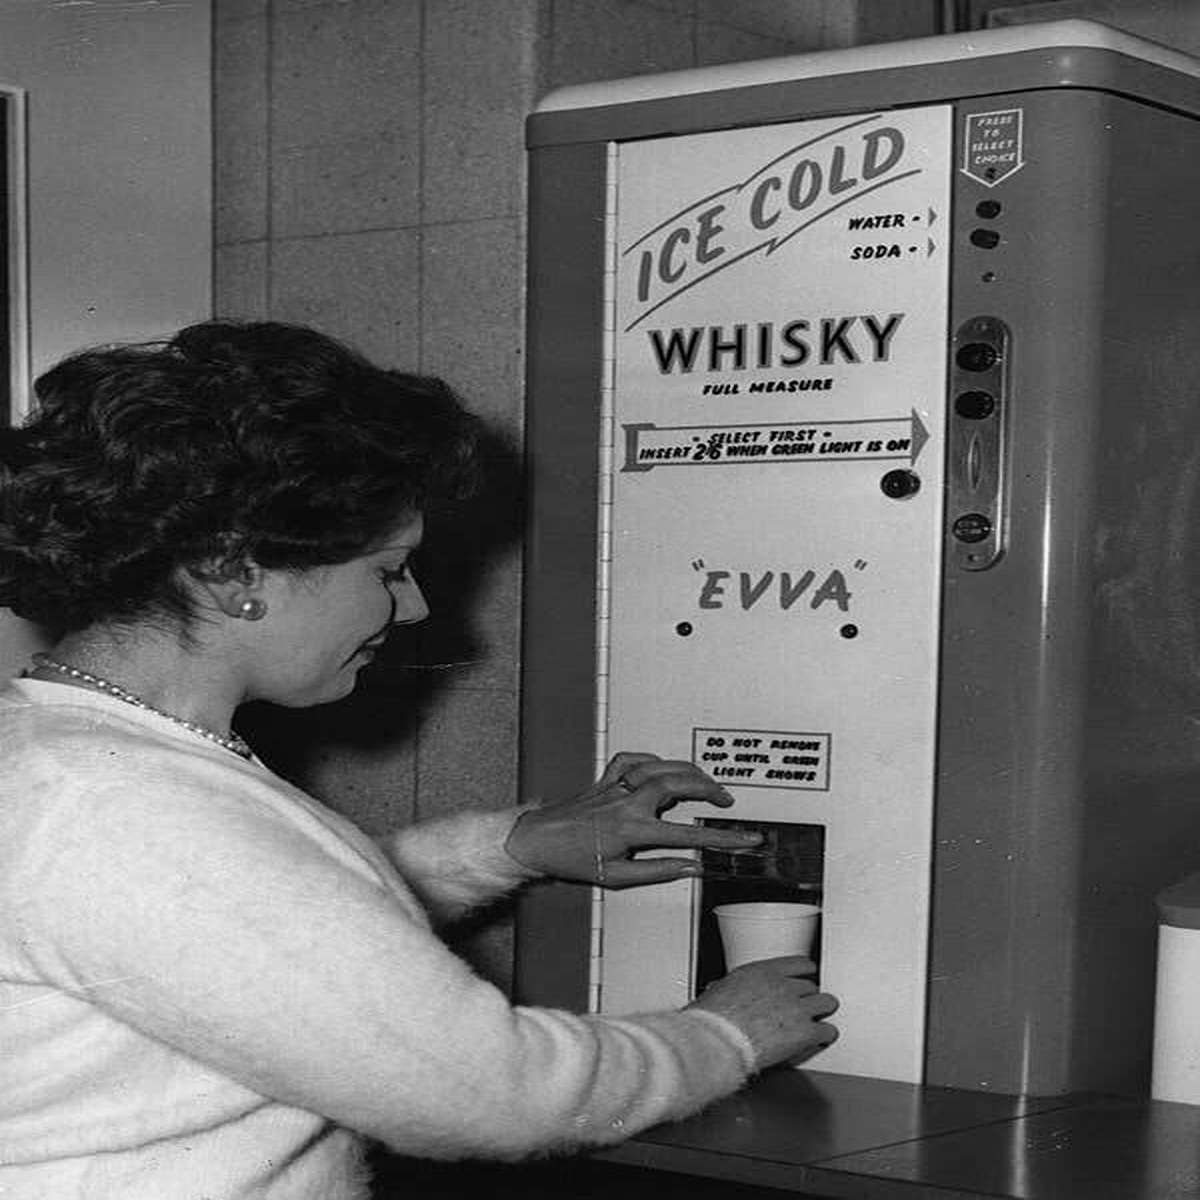 An Ice Cold Whiskey vending machine.